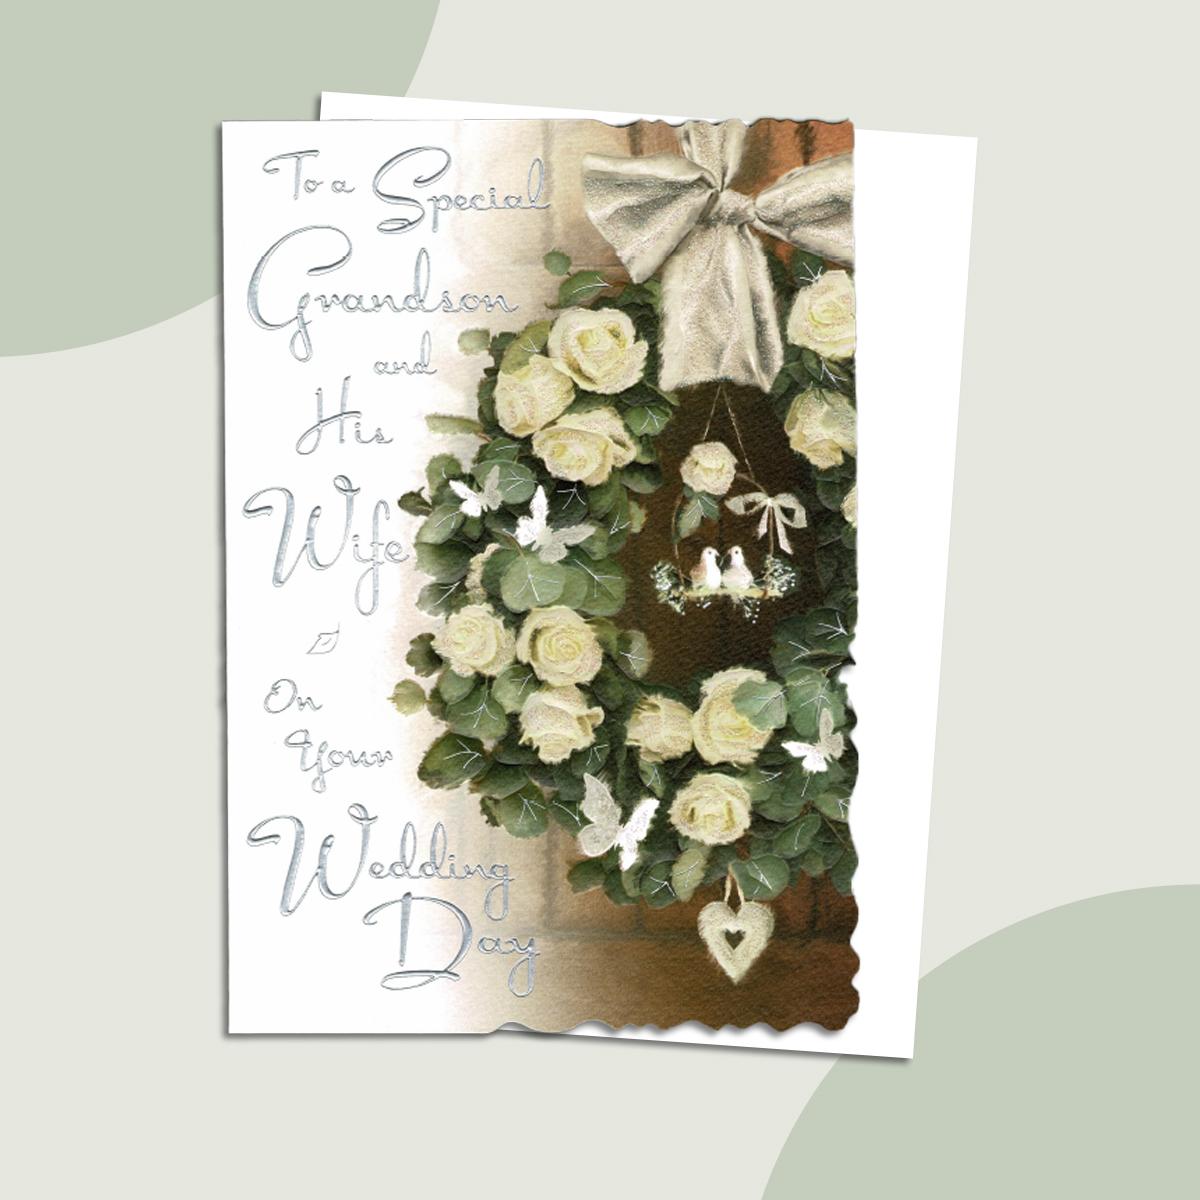 Special Grandson And Wife Wedding Card Alongside Its White Envelope